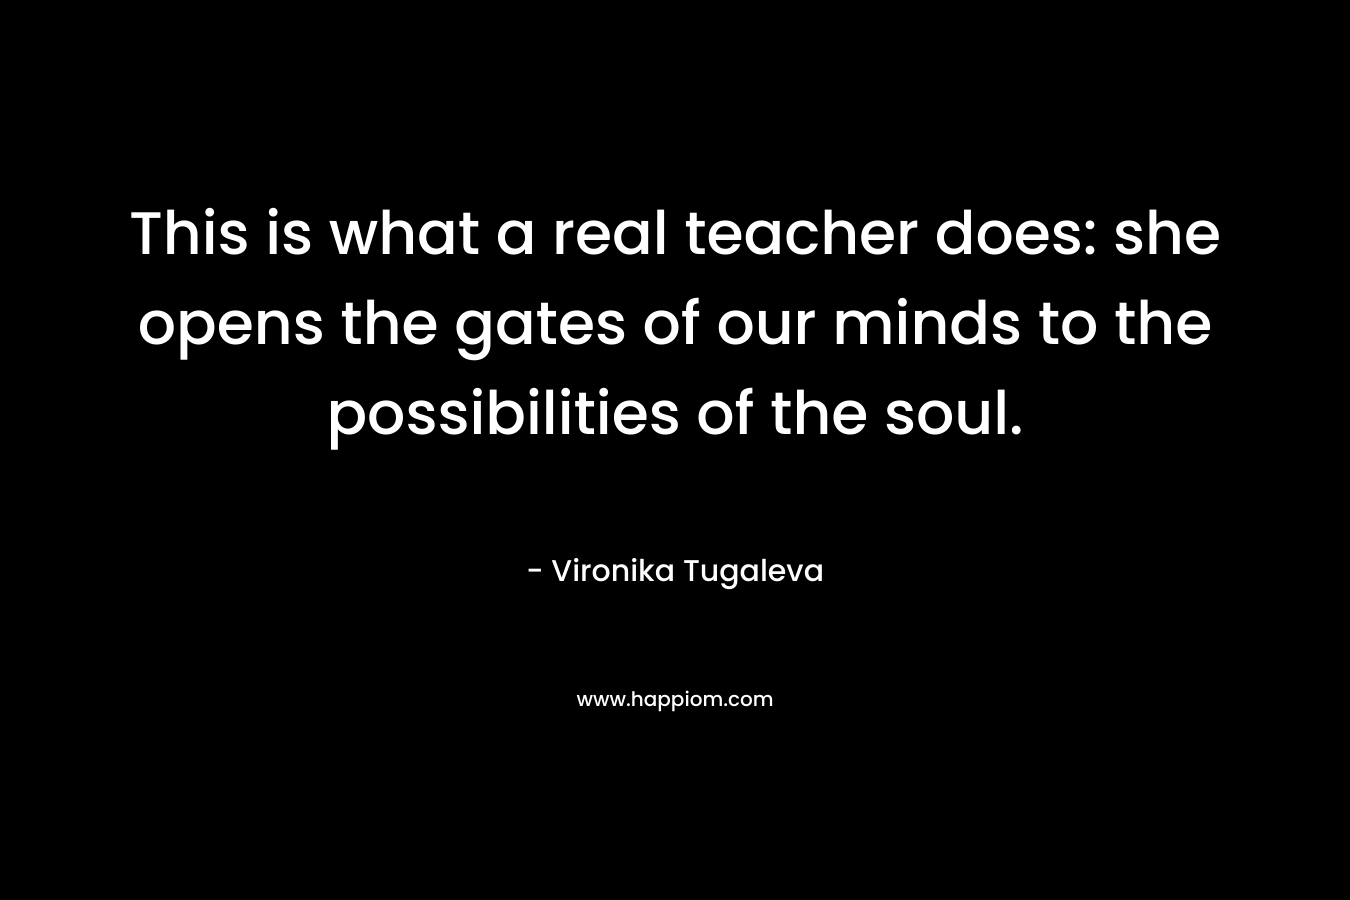 This is what a real teacher does: she opens the gates of our minds to the possibilities of the soul.